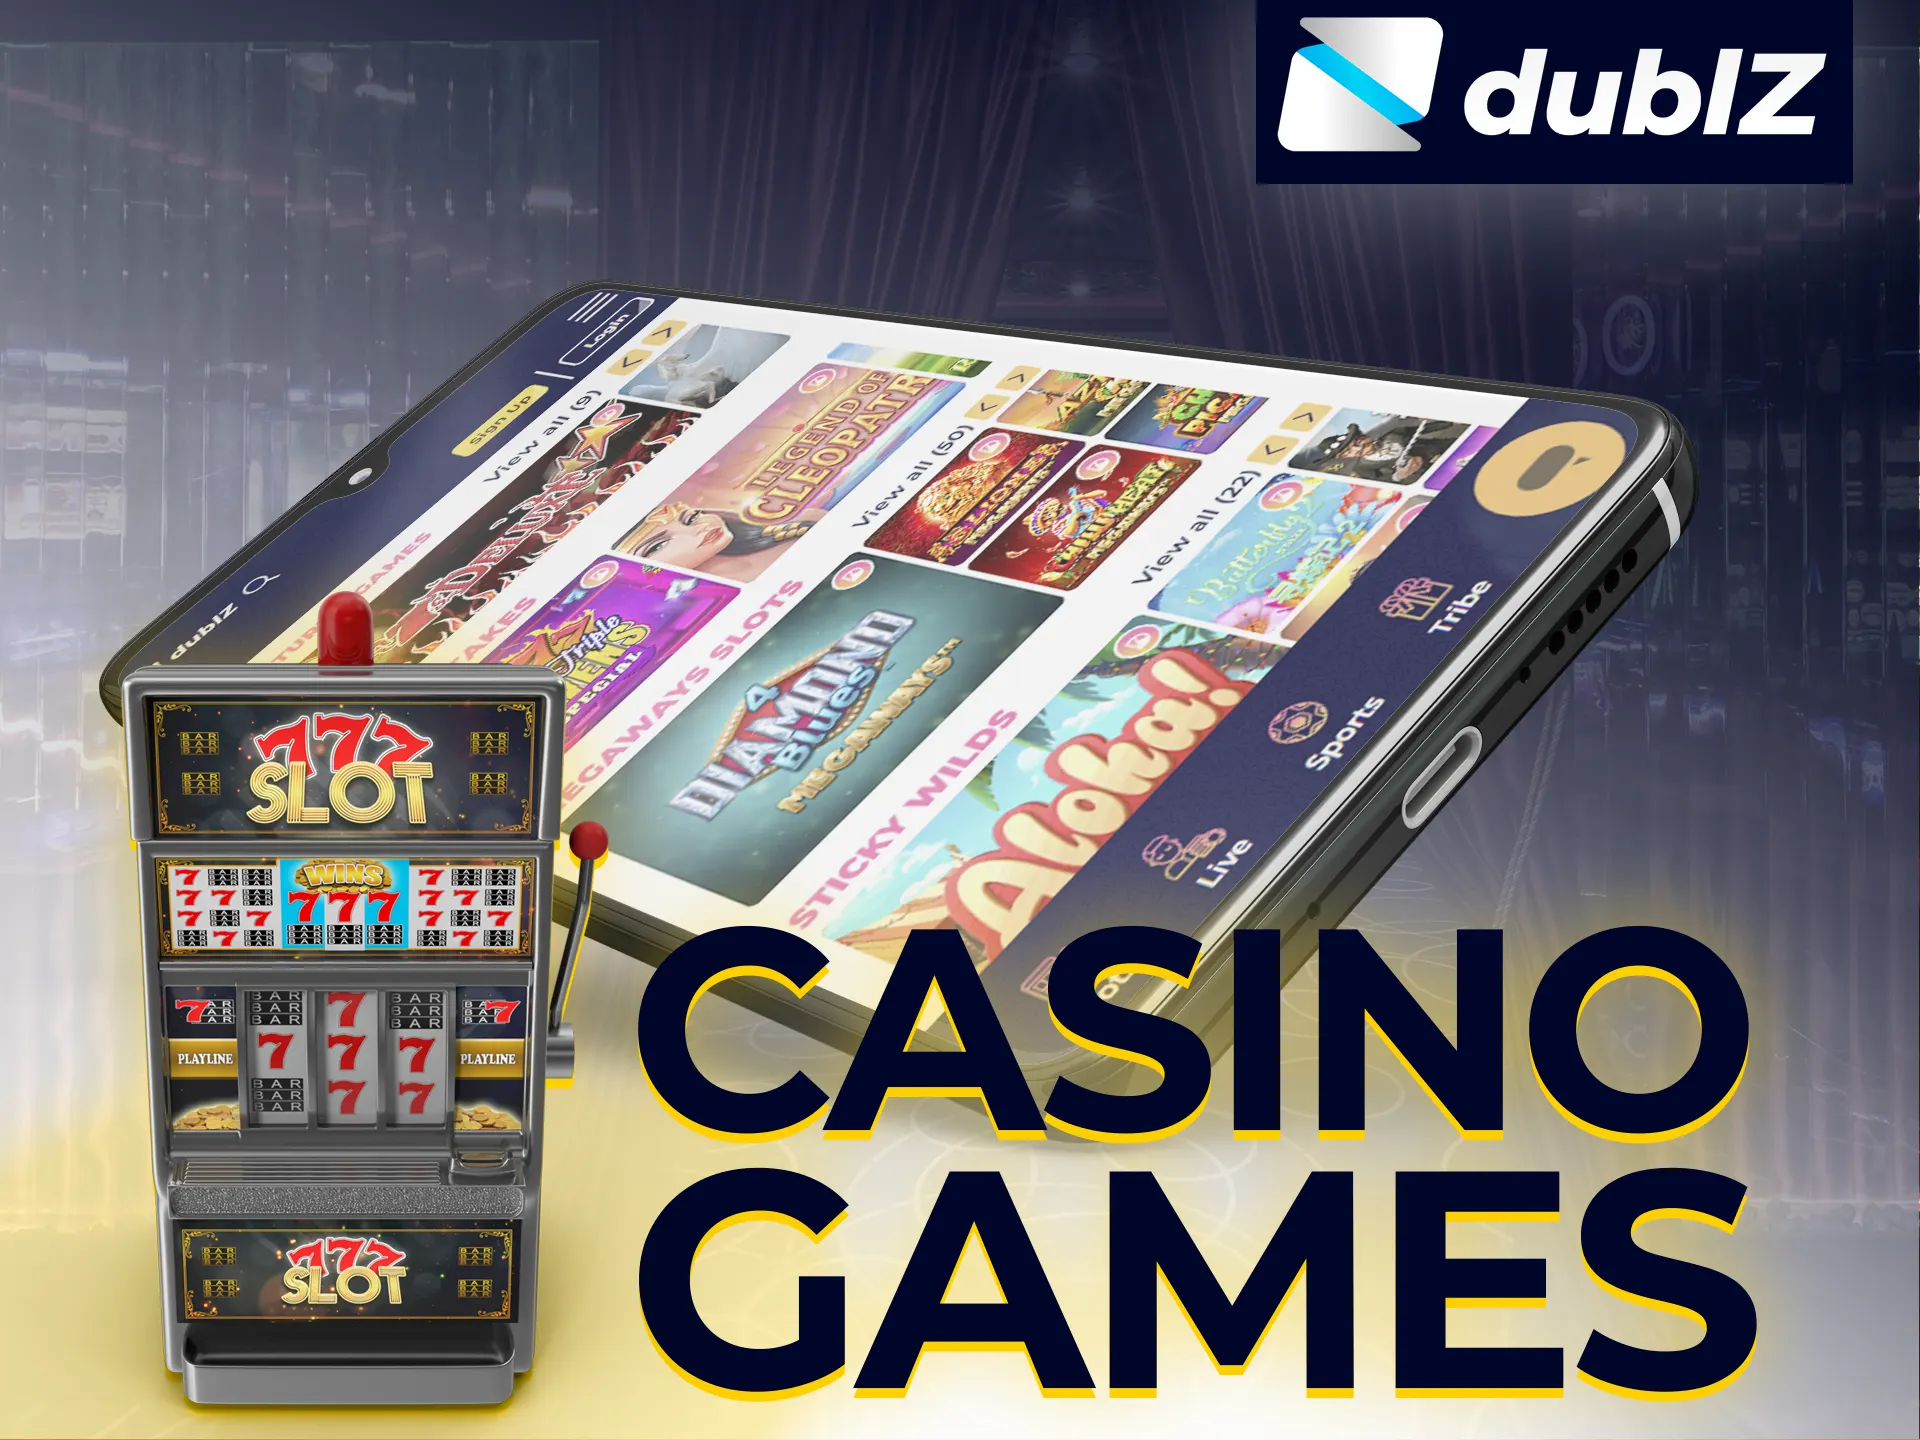 With Dublz app play a variety of casino games.